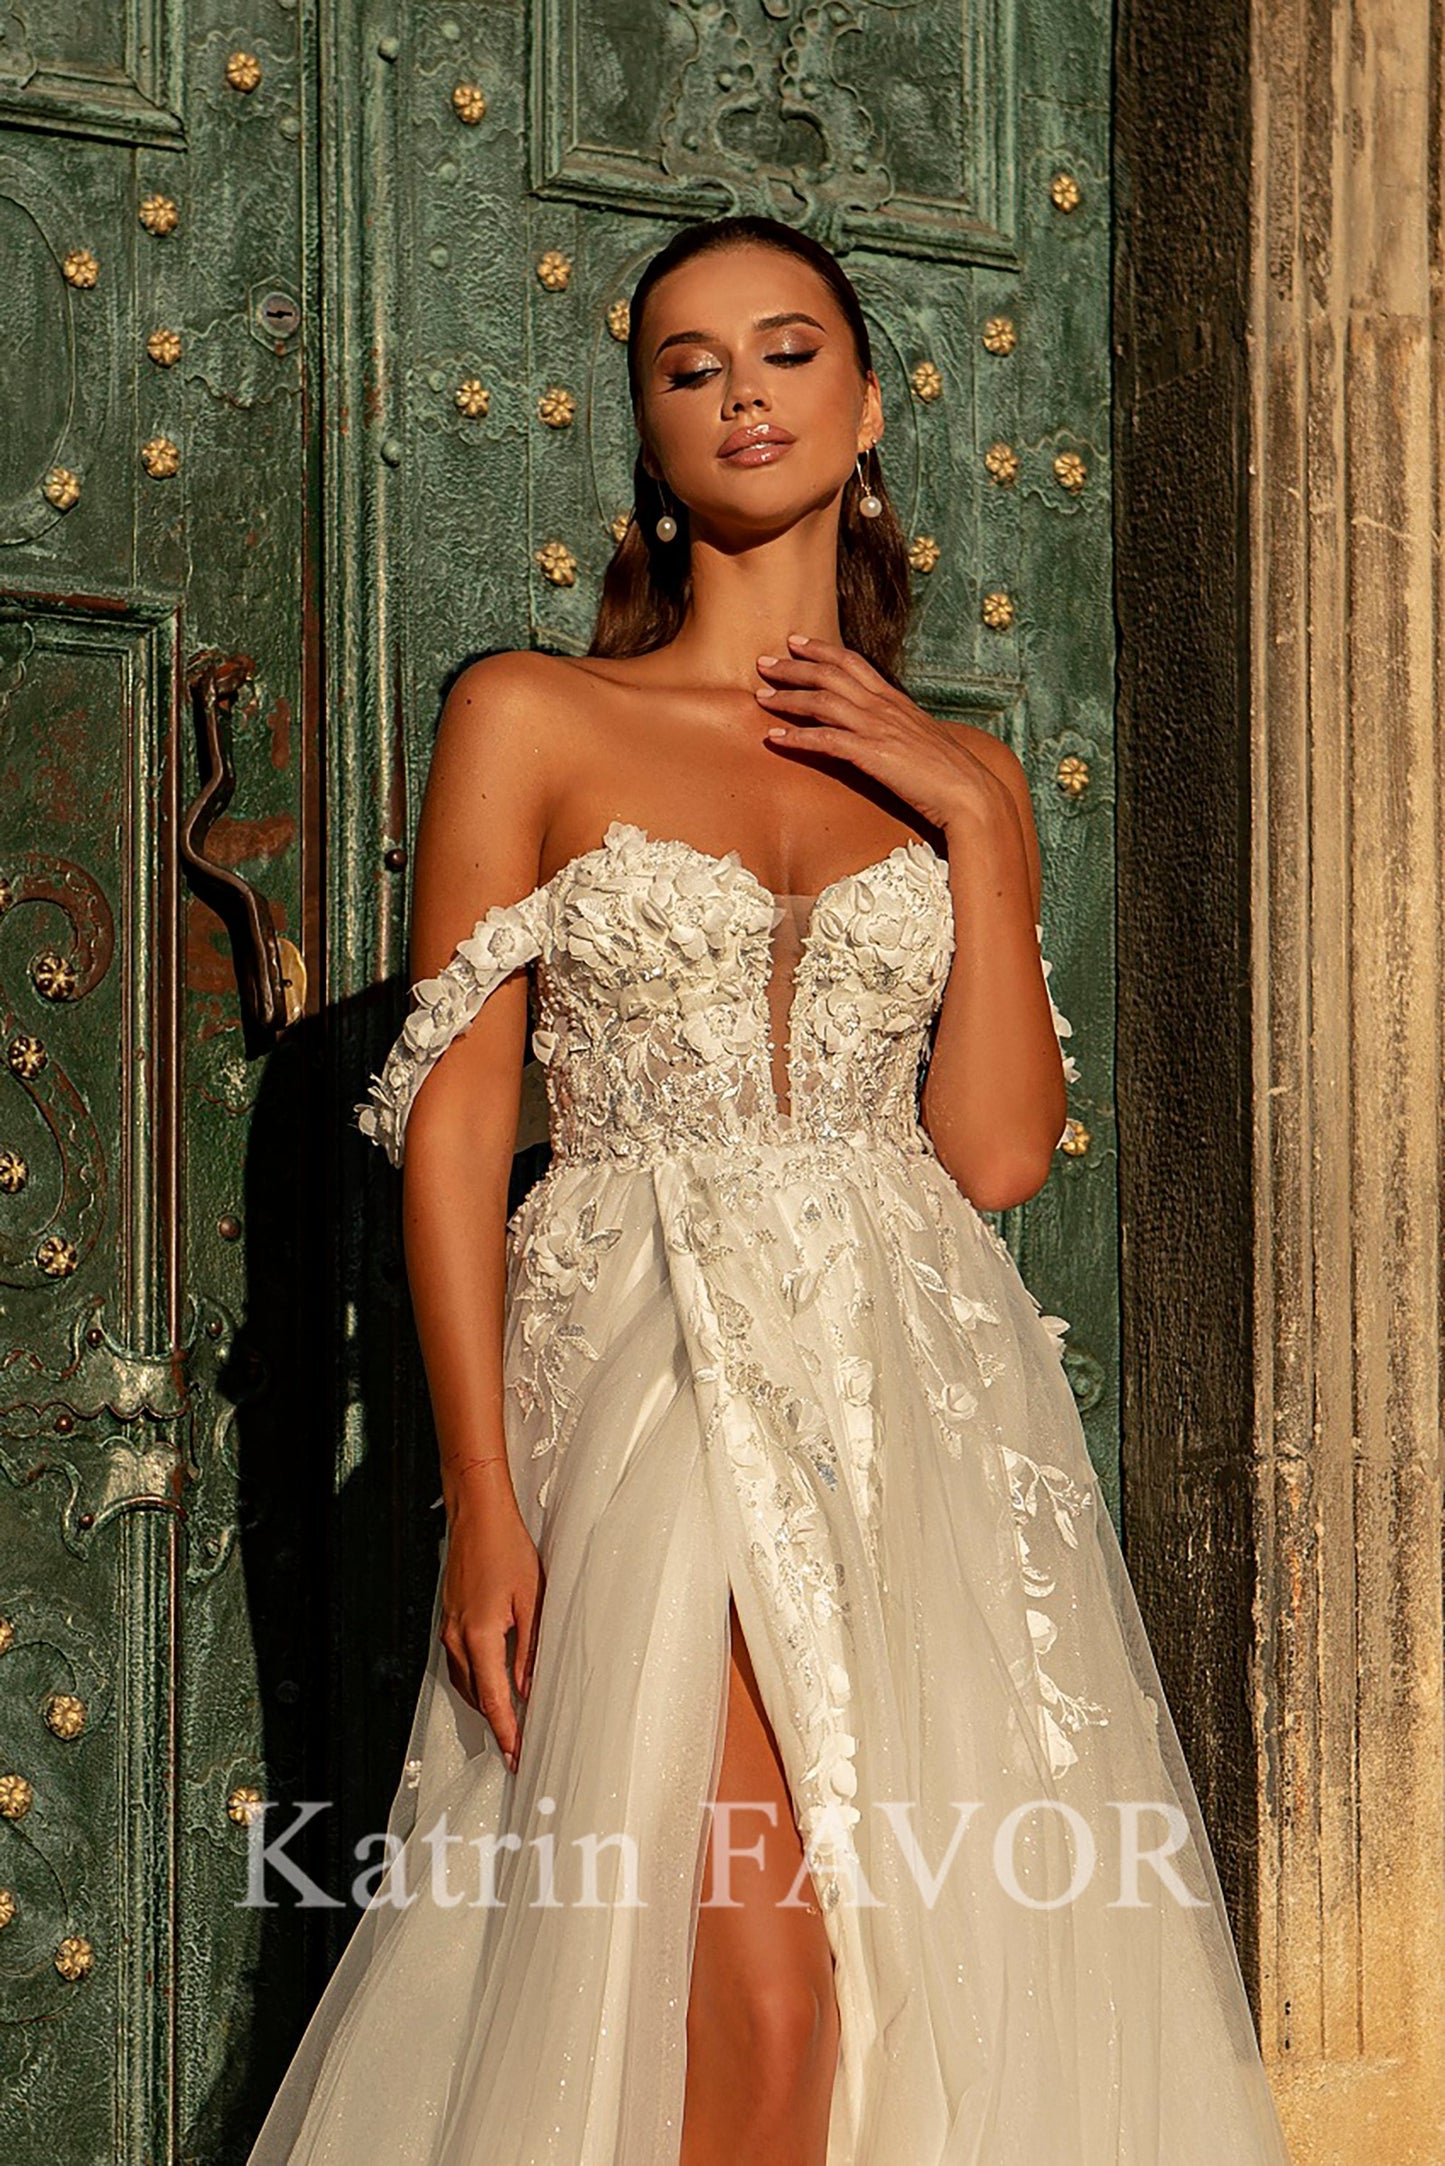 KatrinFAVORboutique-Embroidered a-line beach wedding dress